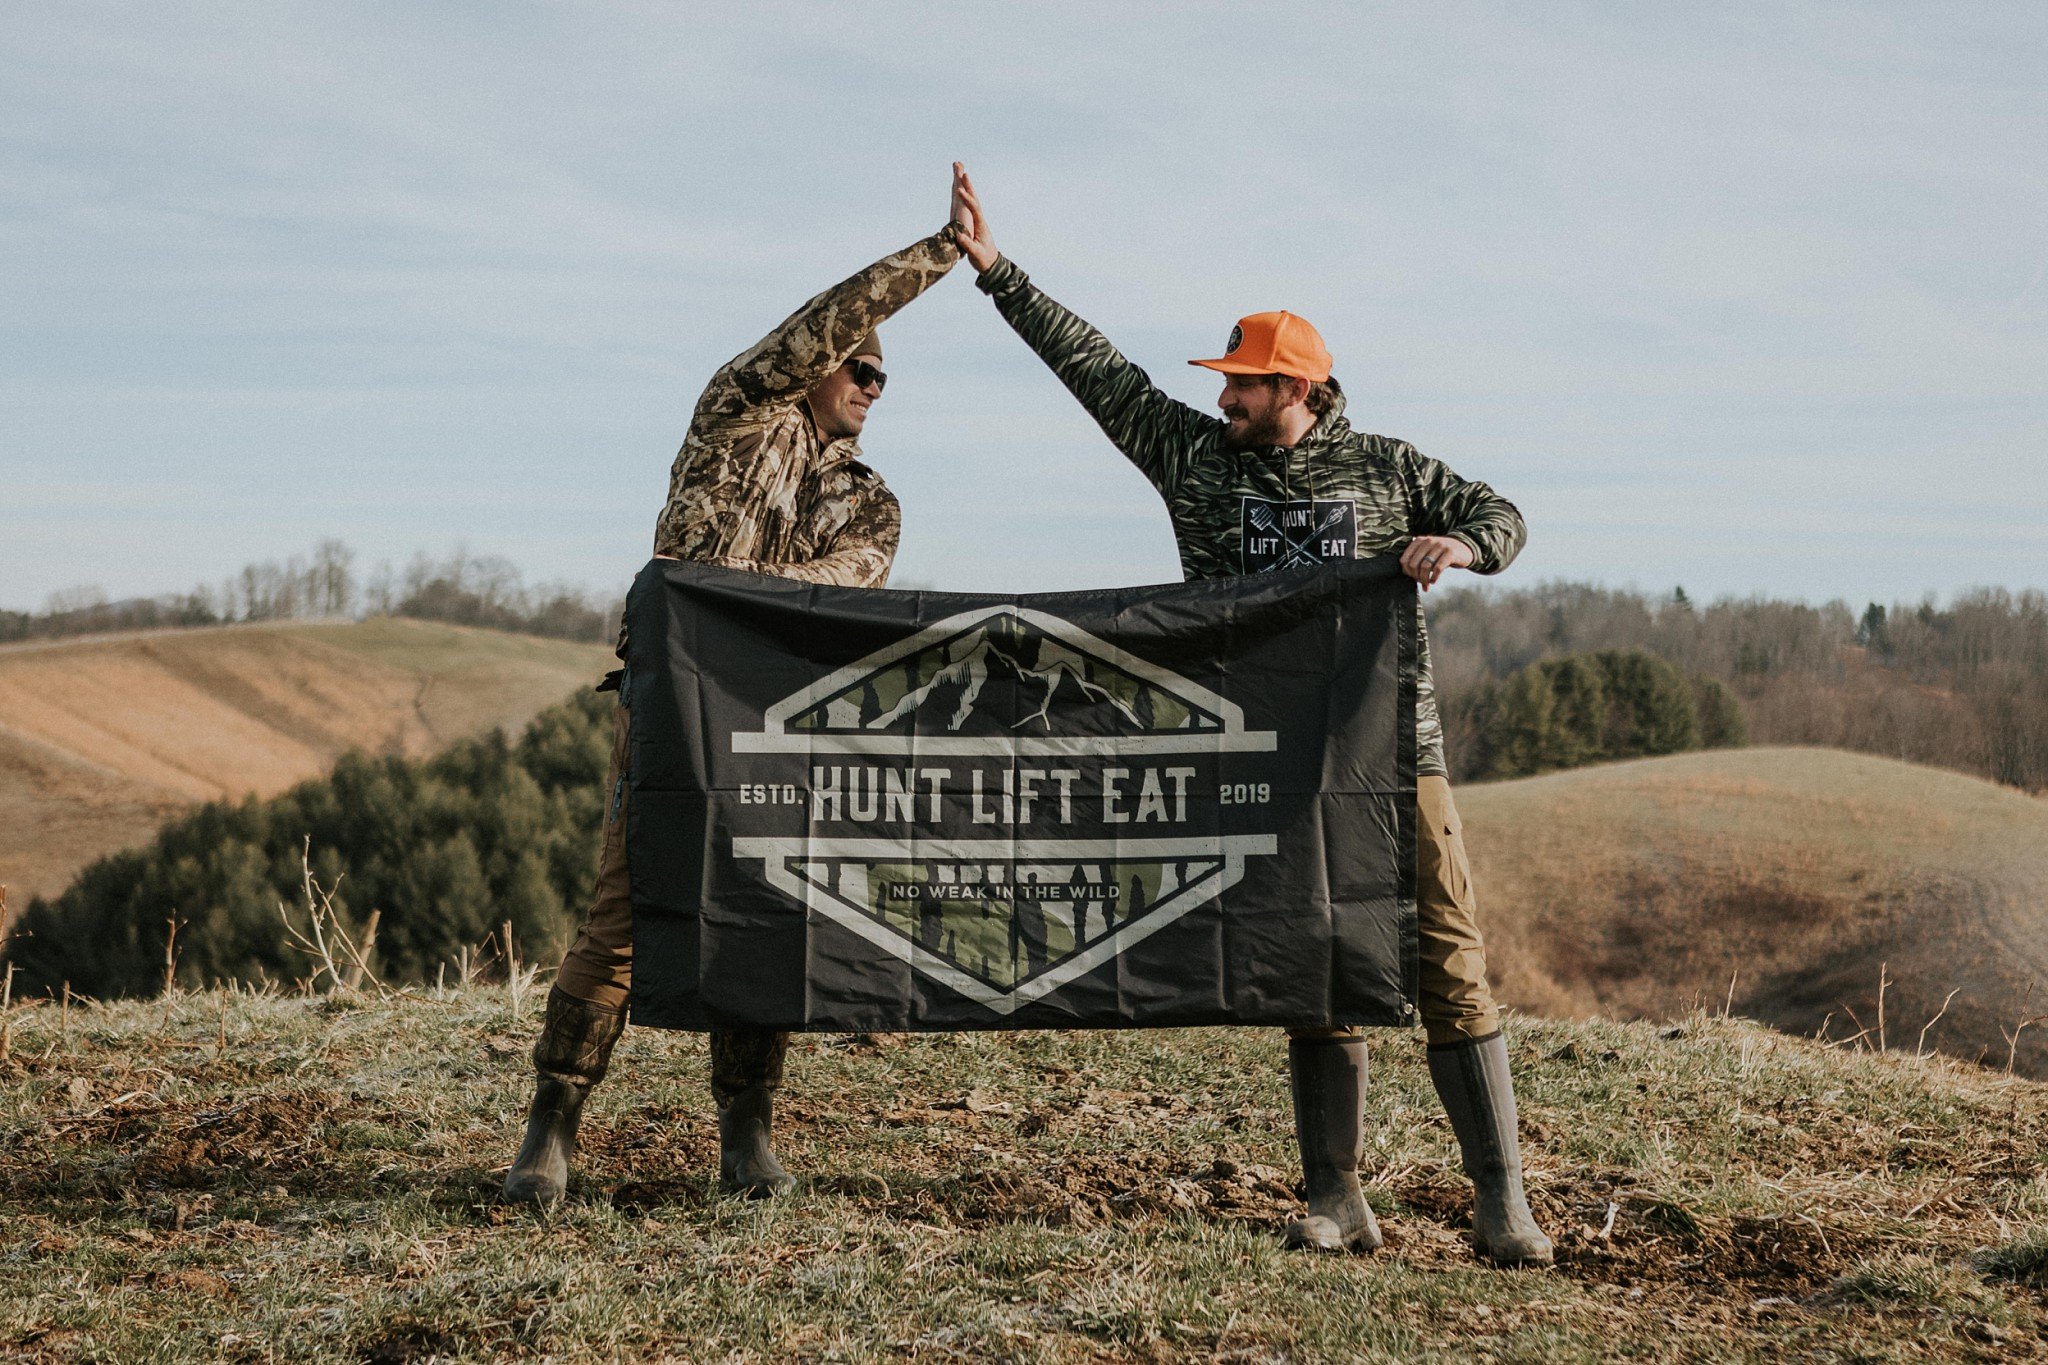 tennessee-outdoor-lifestyle-hunting-hunt-lift-eat-product-brand-branding-photography-entrepreneur-small-business-johnson-city-bristol-kingsport-east-tn-katy-sergent_0001.jpg